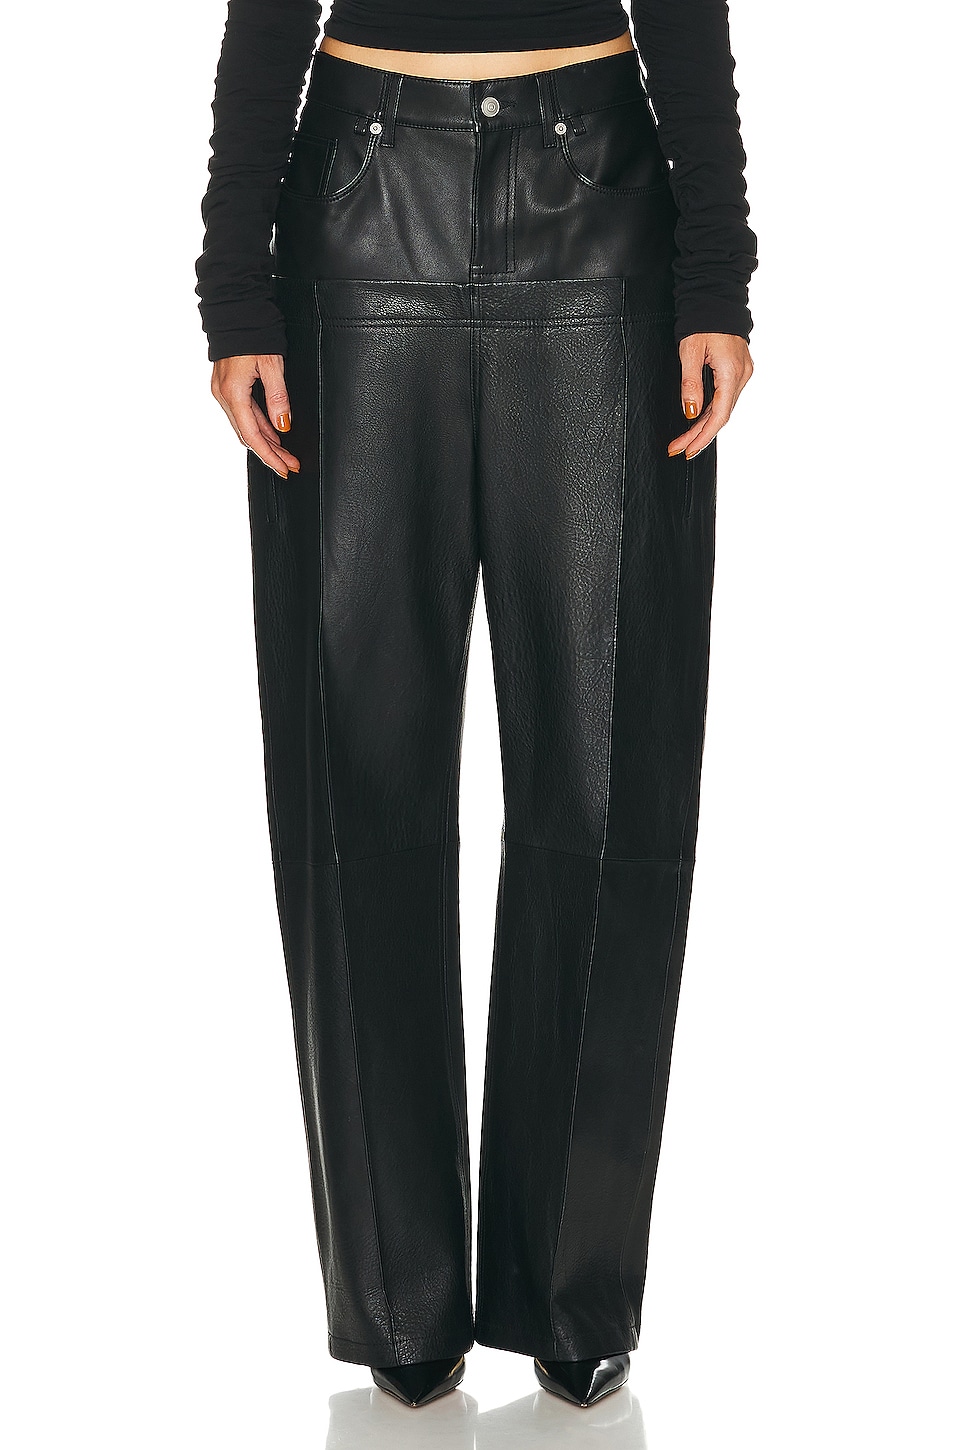 Double Waistband Pant in Black